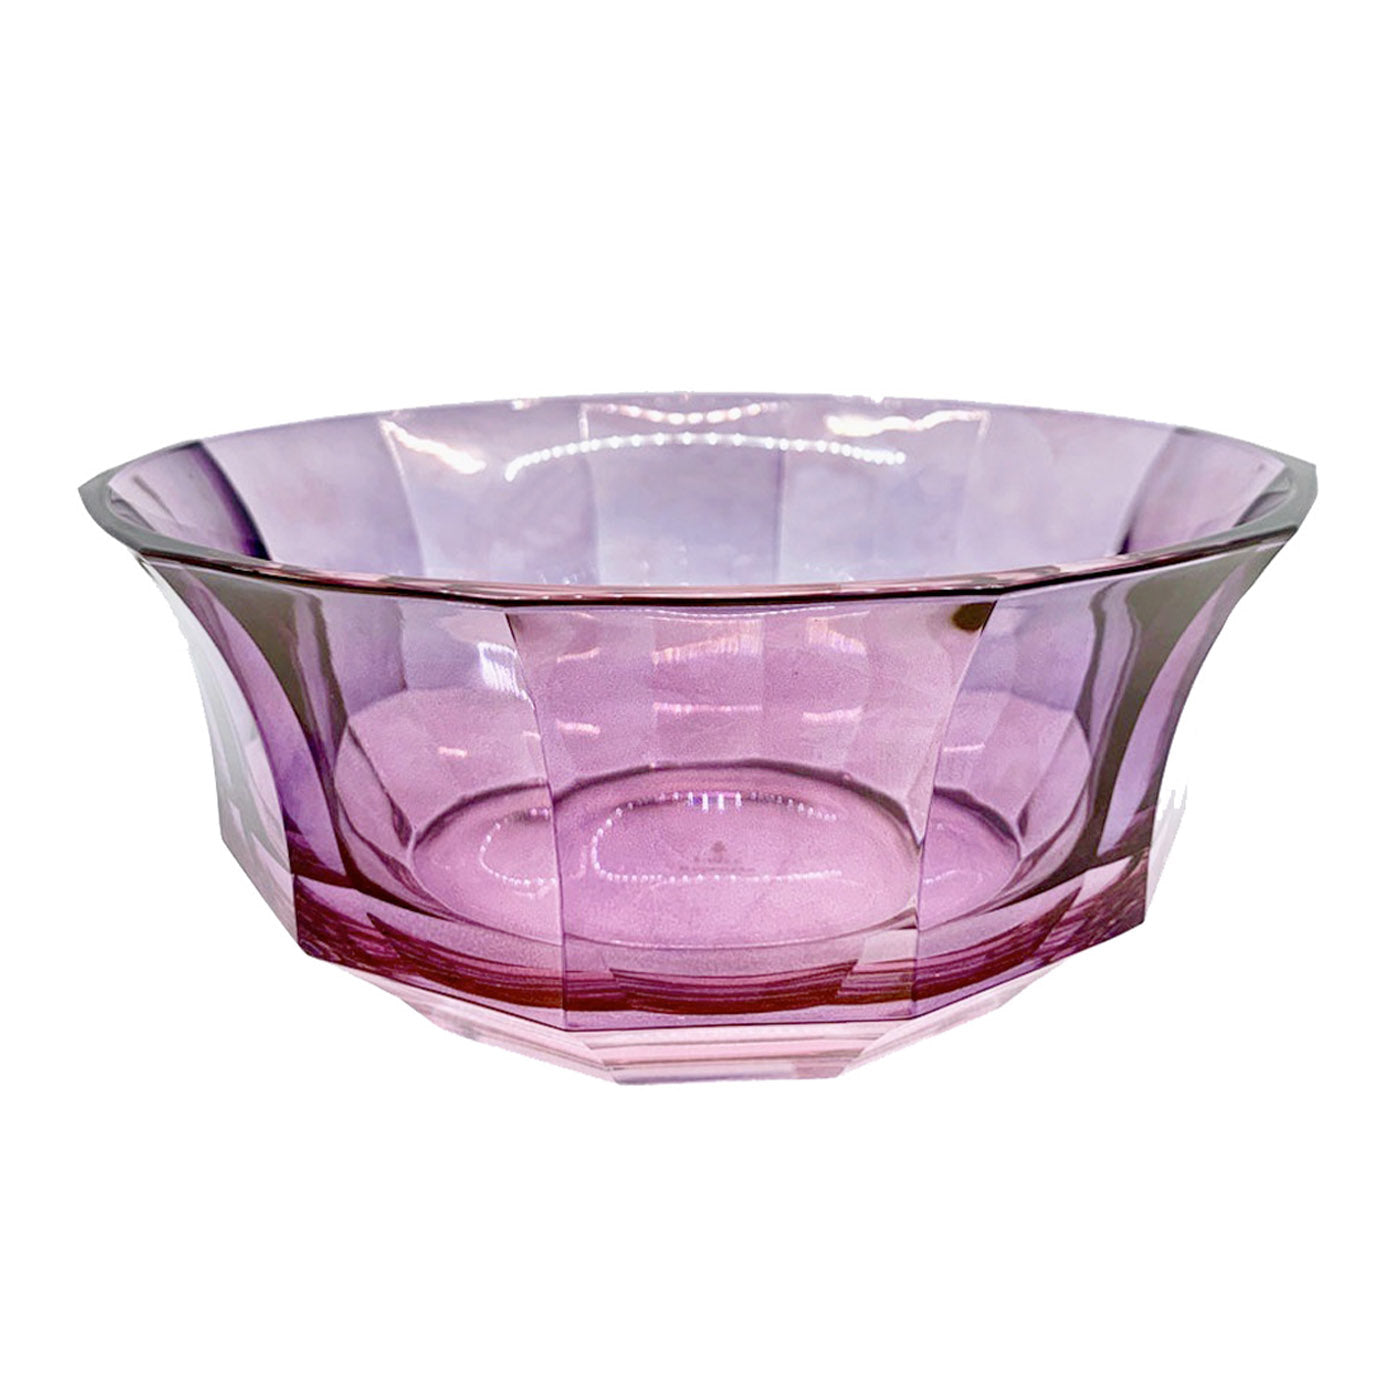 Faceted Pink-To-Purple Crystal Salad Bowl - Alternative view 1